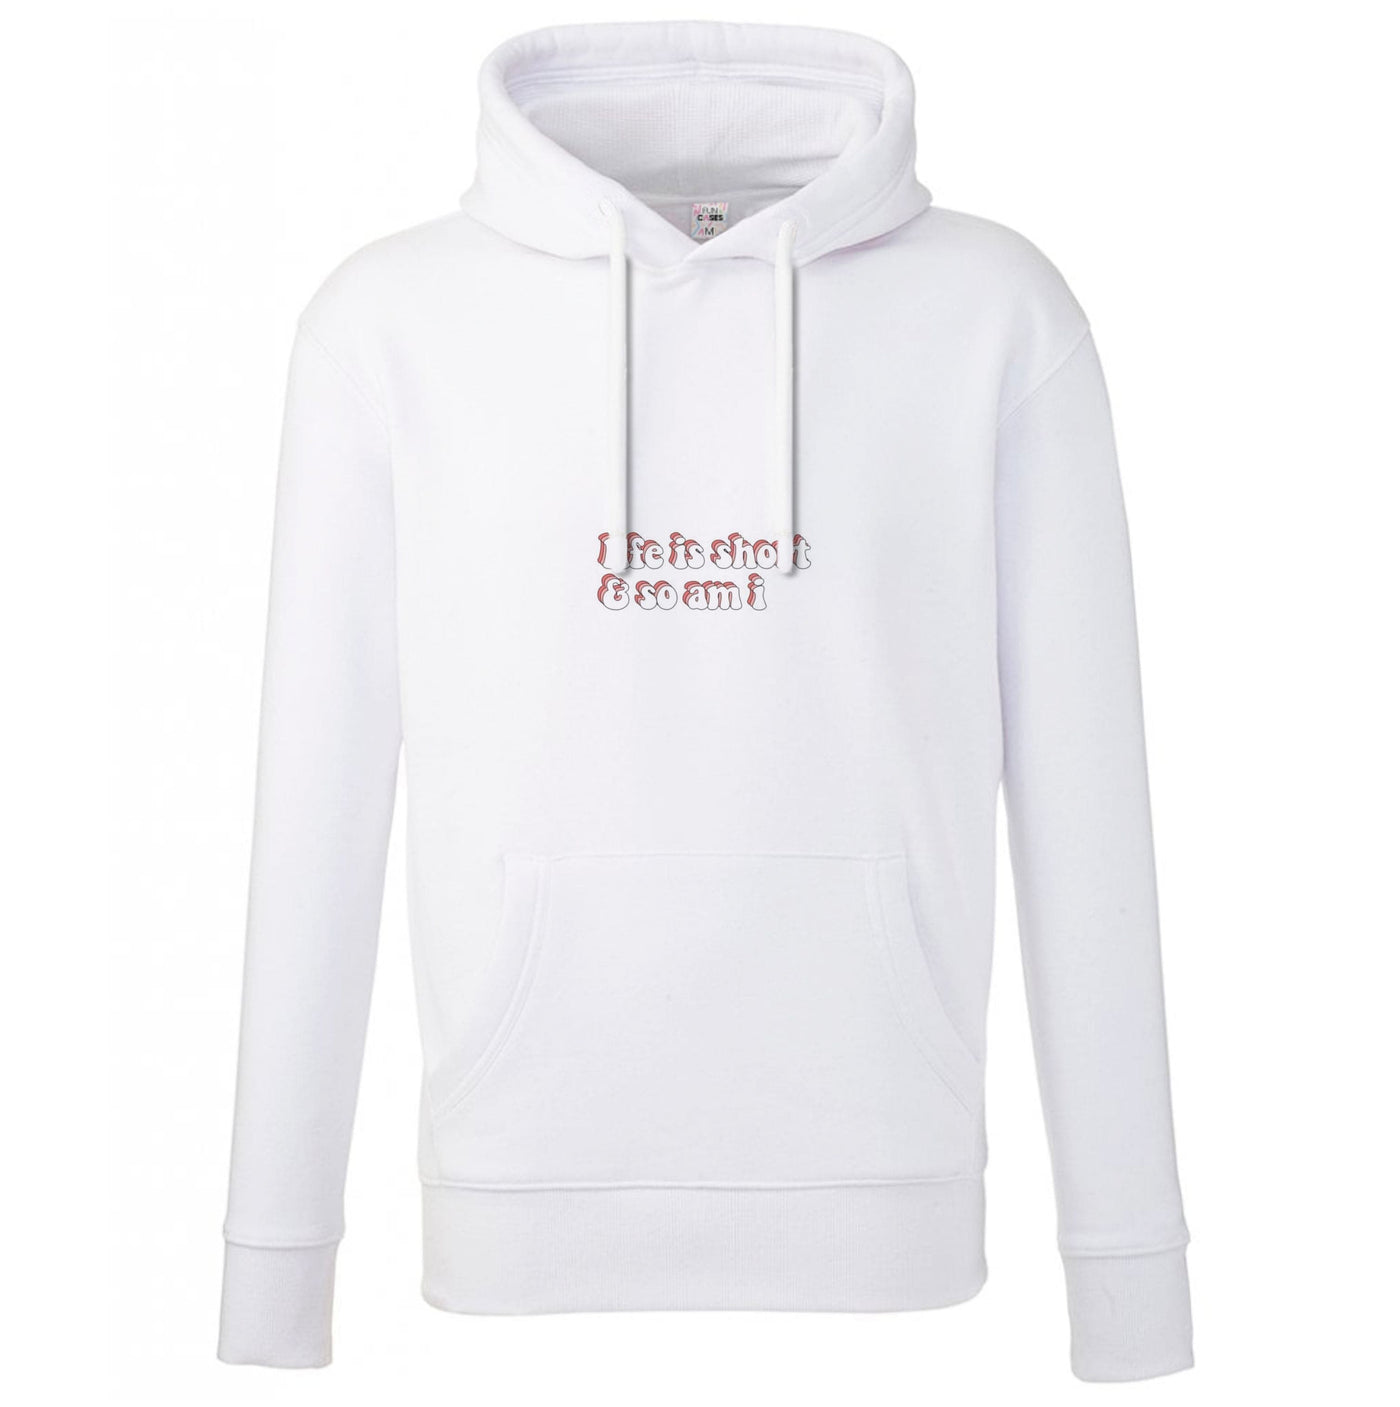 ife Is Short And So Am I - TikTok Hoodie